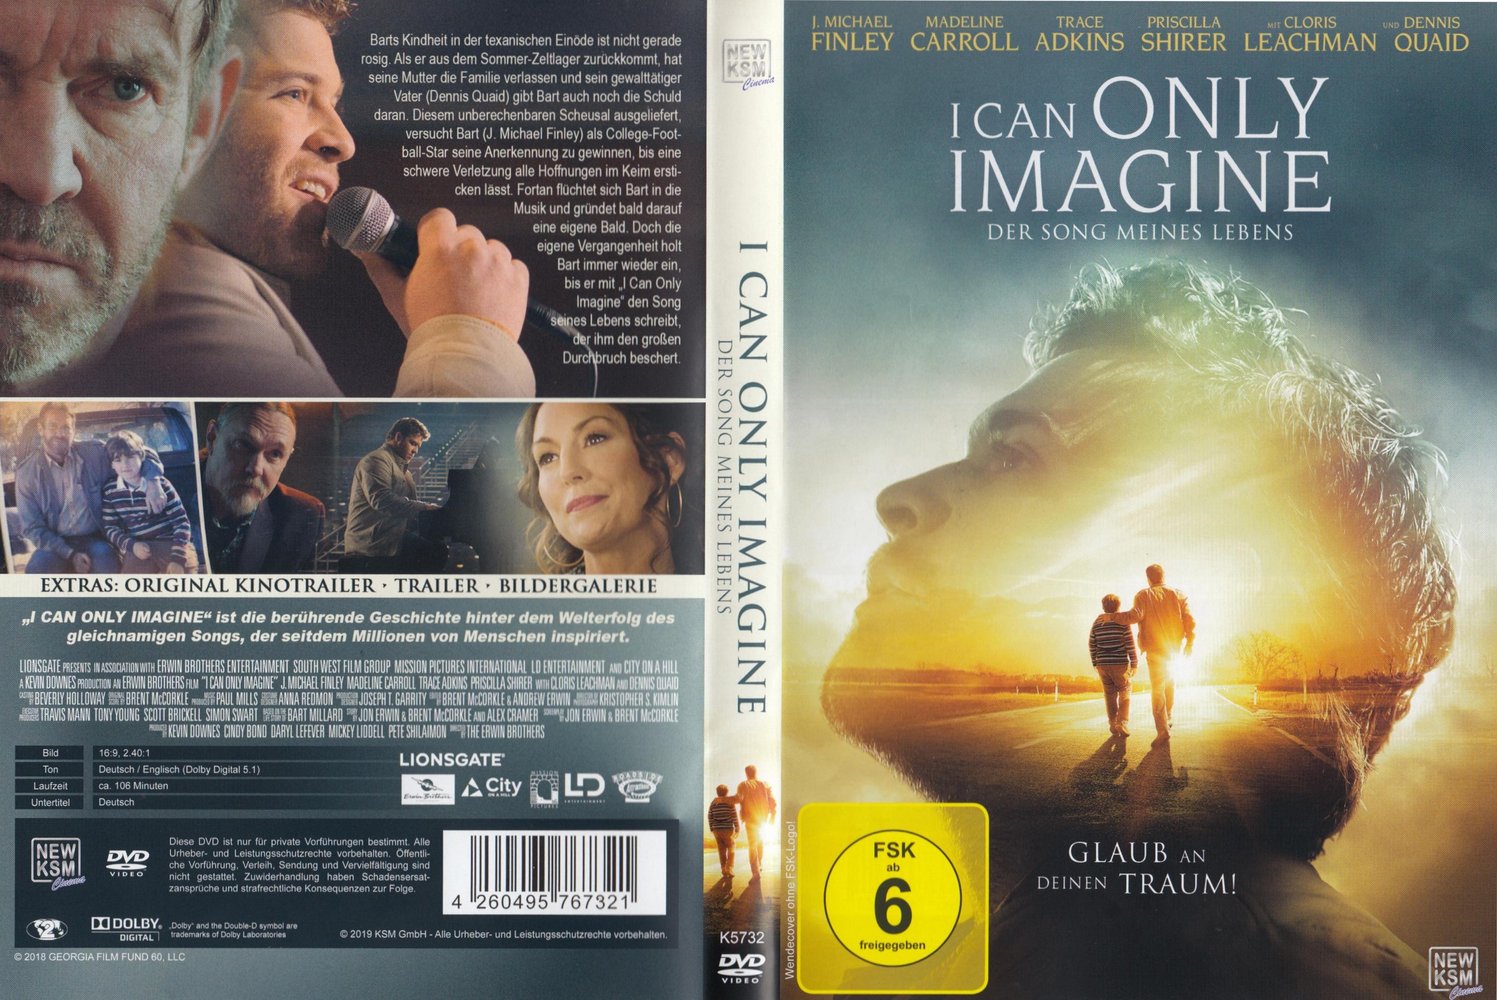 Could only imagine. DVD imagination 2.